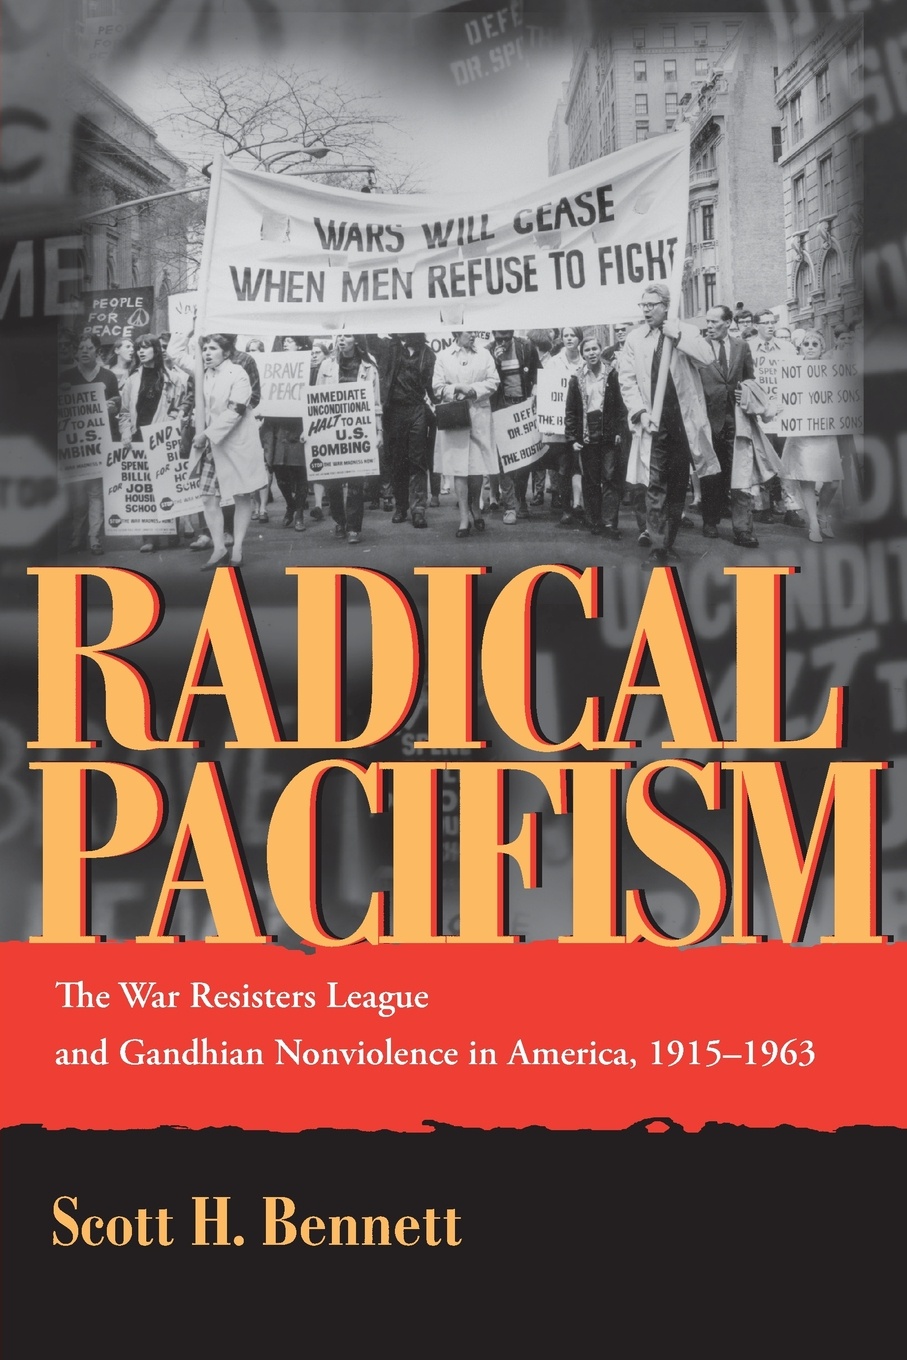 Radical Pacifism. The War Resisters League and Gandhian Nonviolence in America, 1915-1963